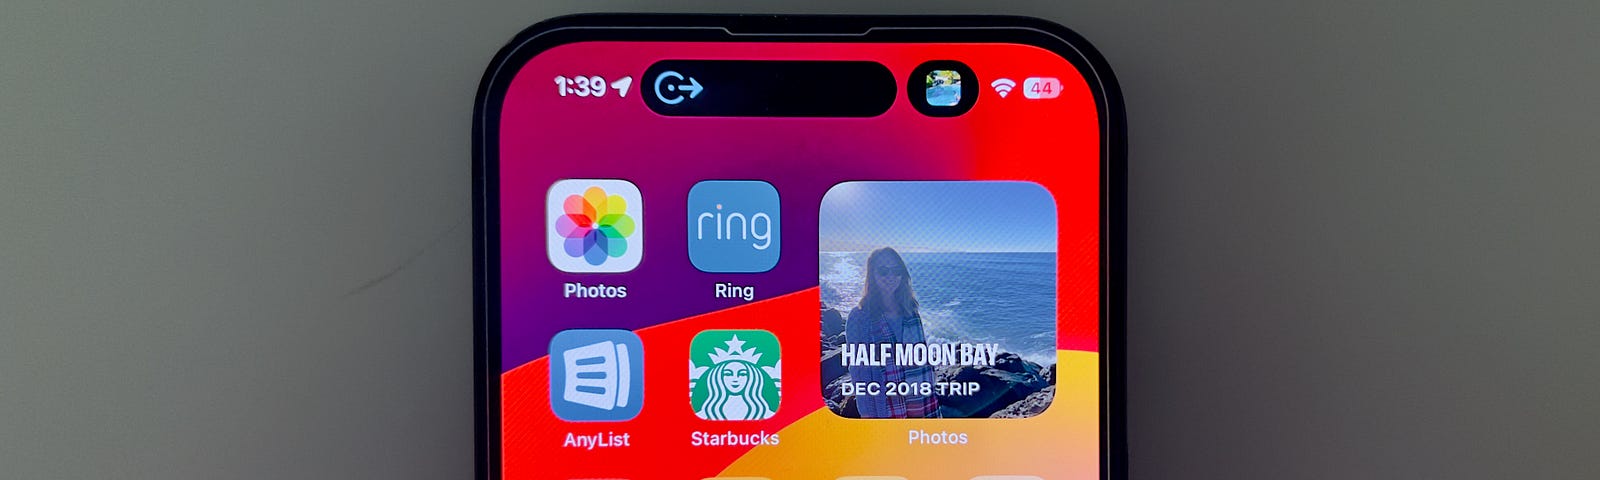 iPhone 14 Pro’s Dynamic Island showing Navigation and Music playing.